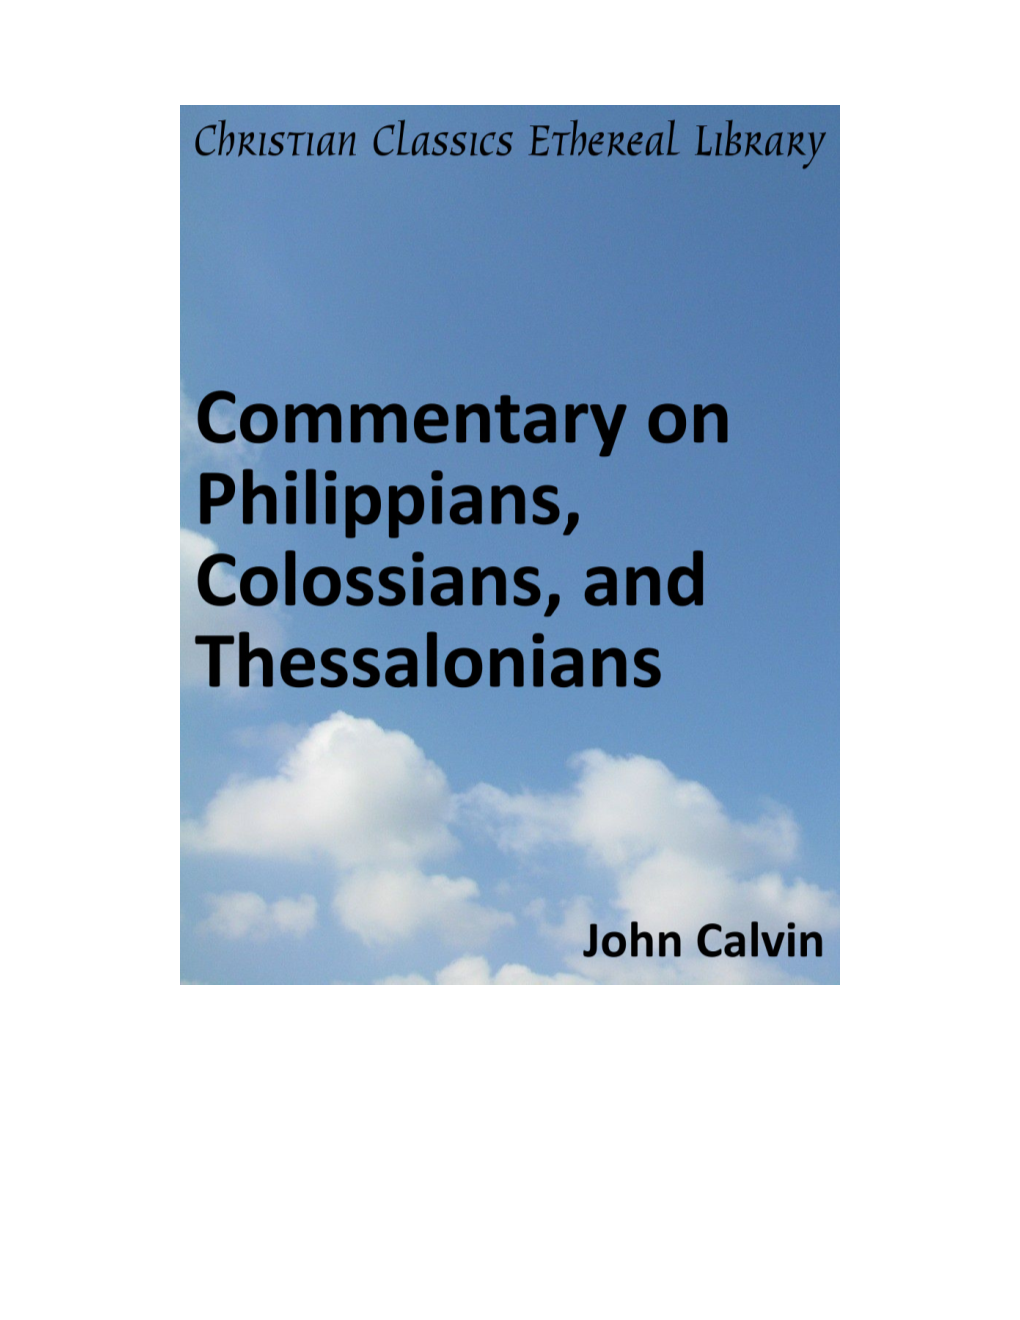 Commentary on Philippians, Colossians, and Thessalonians